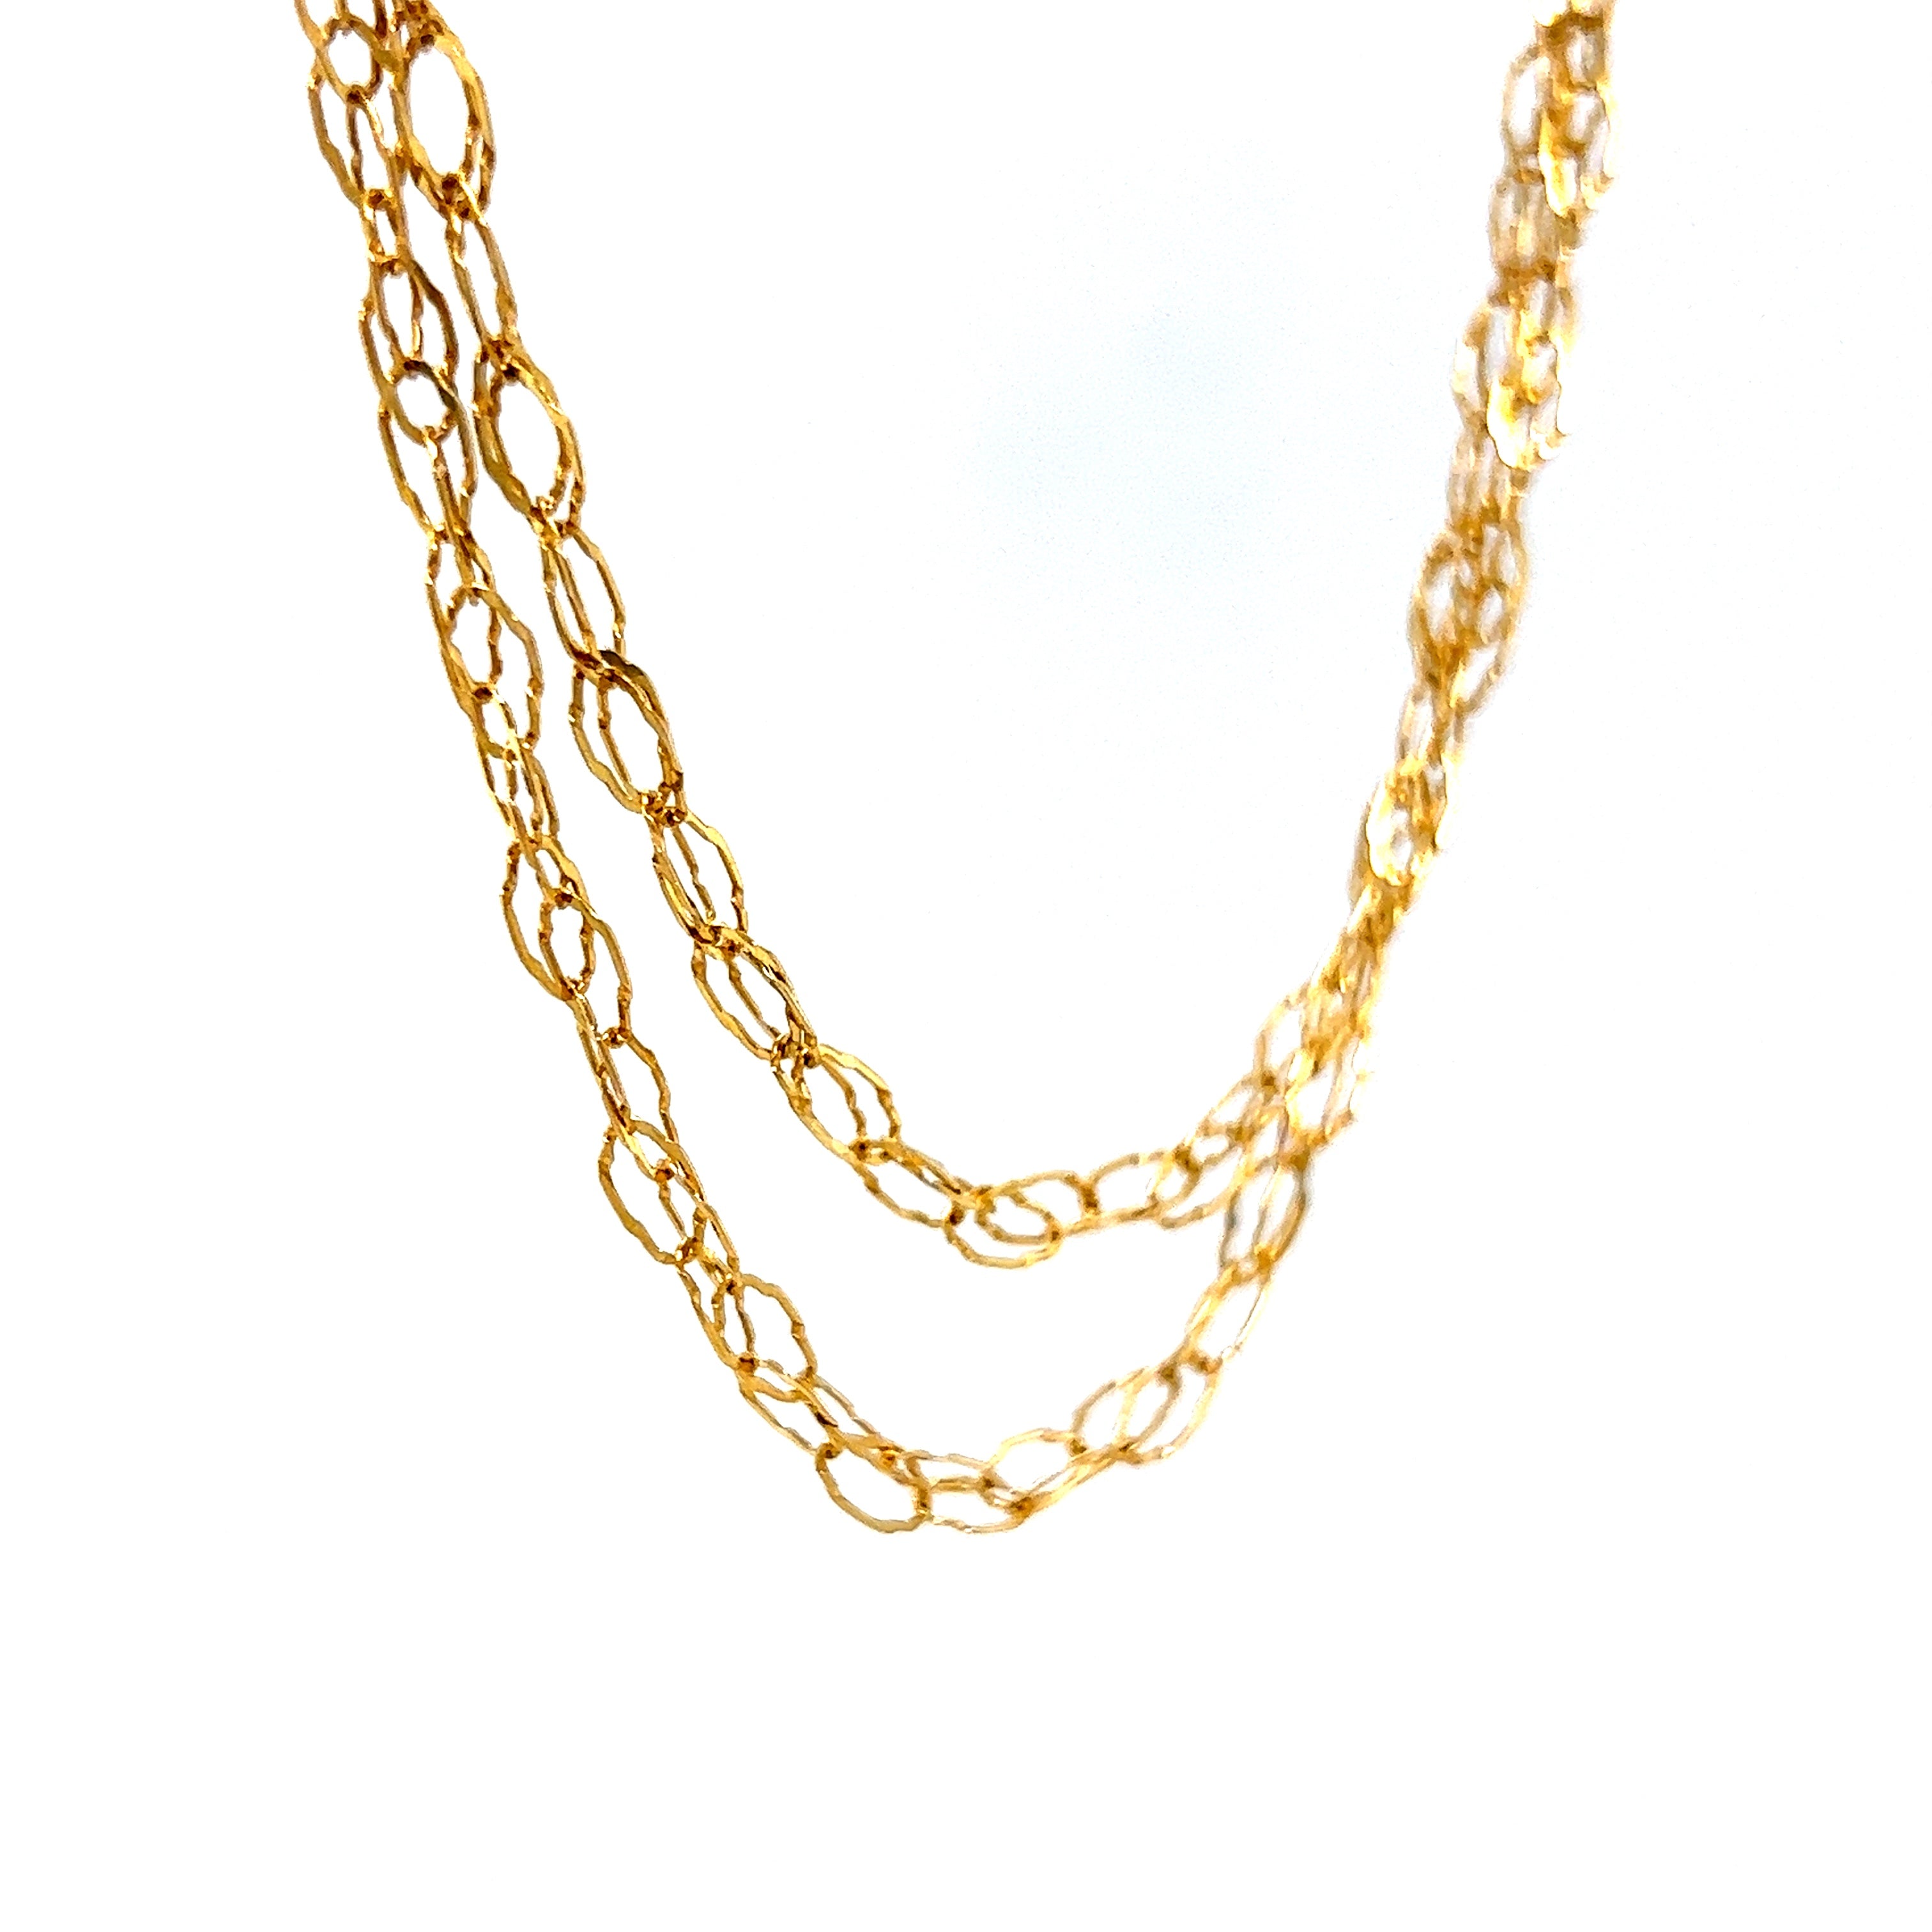 Ball Combination Chain #yarmoukgold #Dubai #gold #jewelery #fashion #chains  #accessories | Real gold chains, Neck pieces jewelry, Fancy jewelry necklace